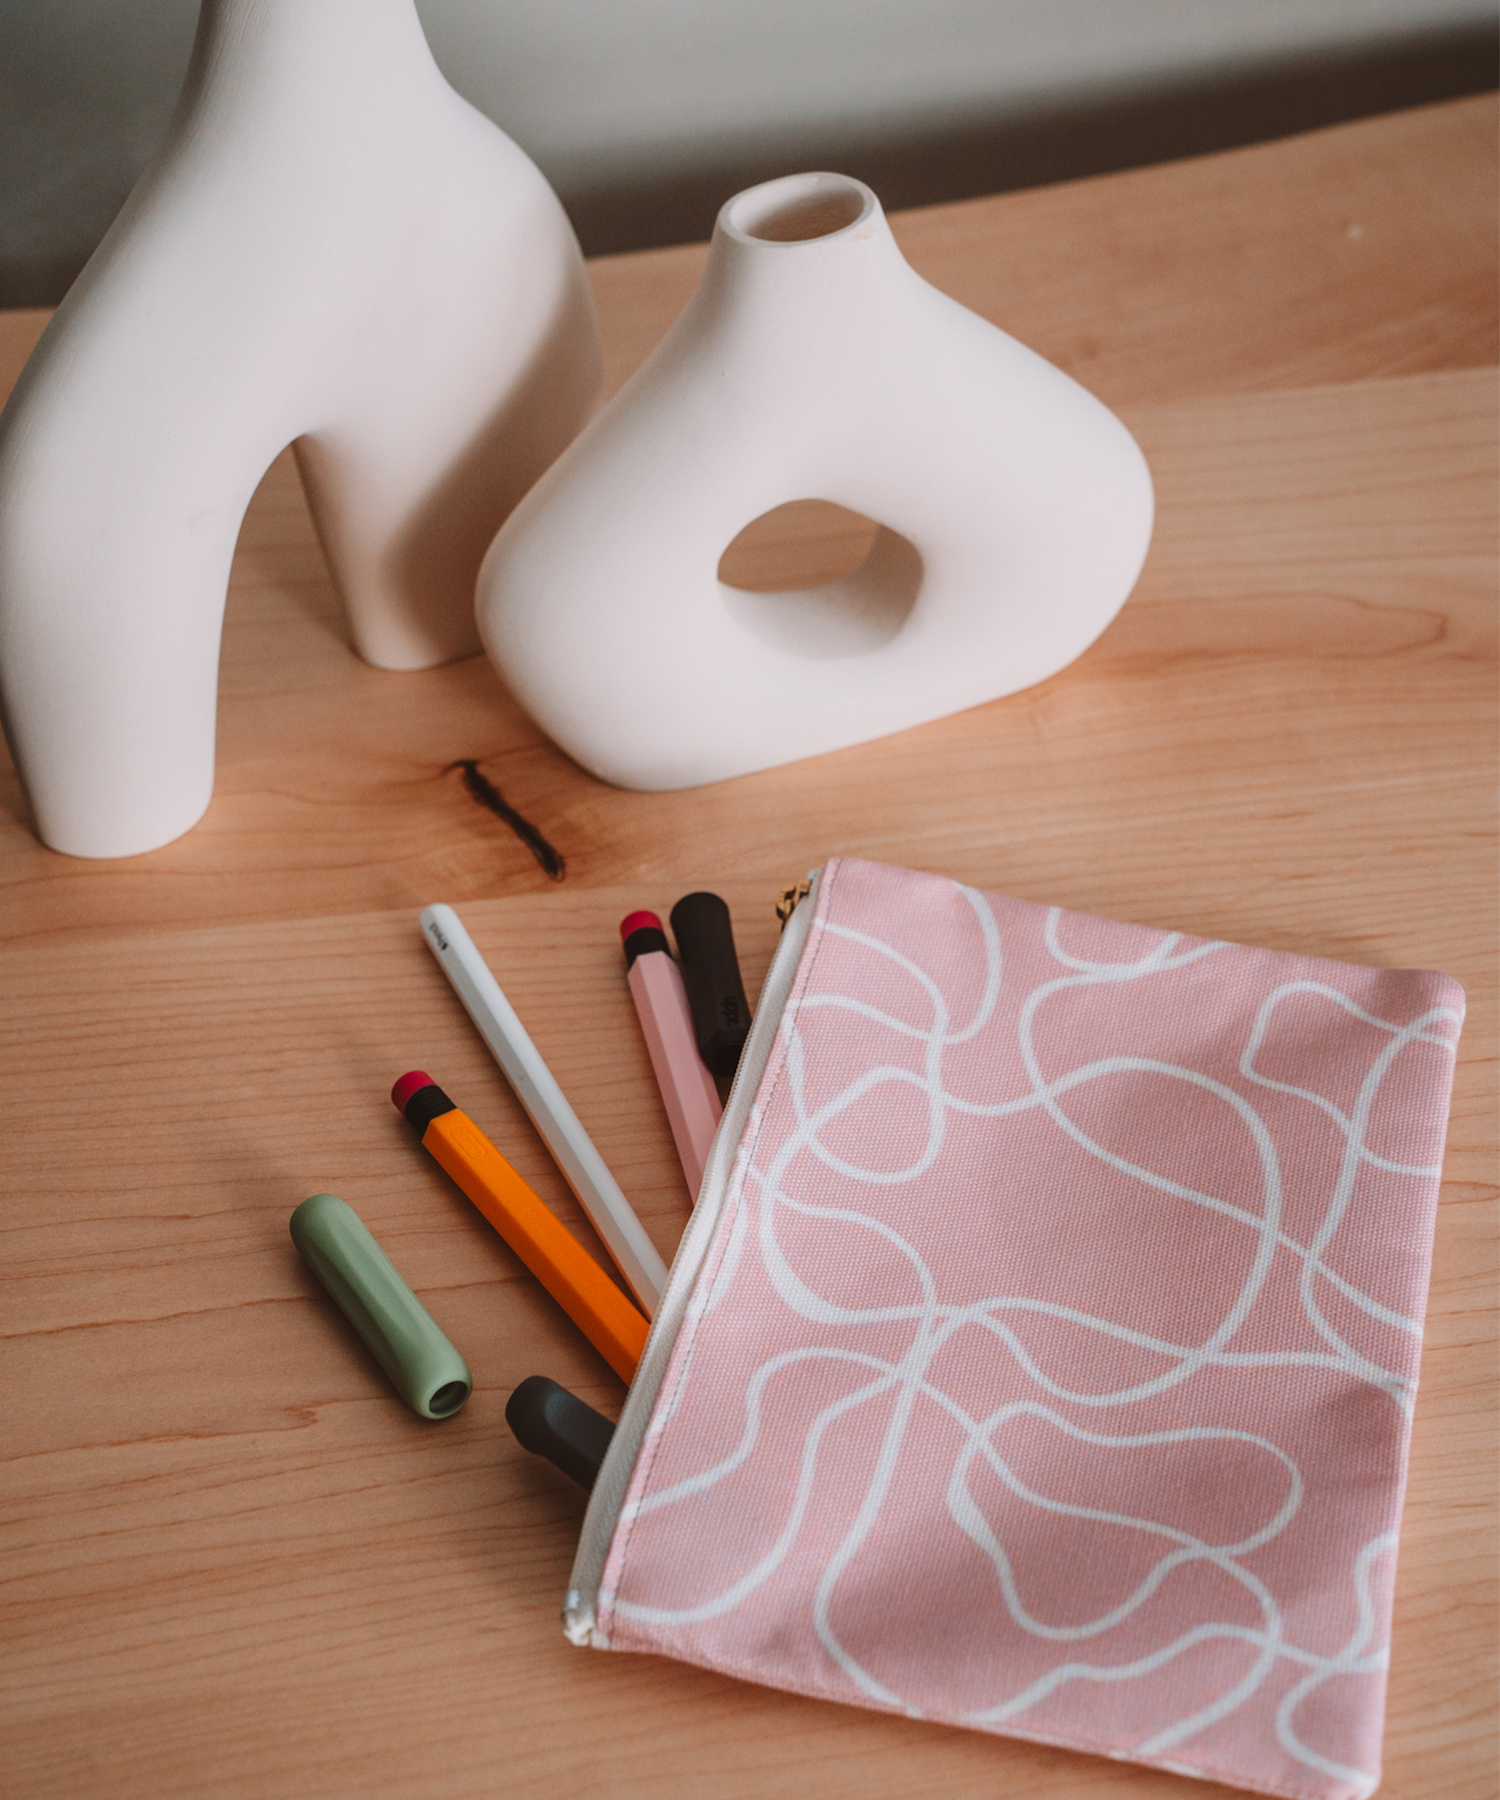 The Terrain accessory pouch is laying on a desk with Apple Pencil accessories spilling out. In the background are two asymmetrical vases.